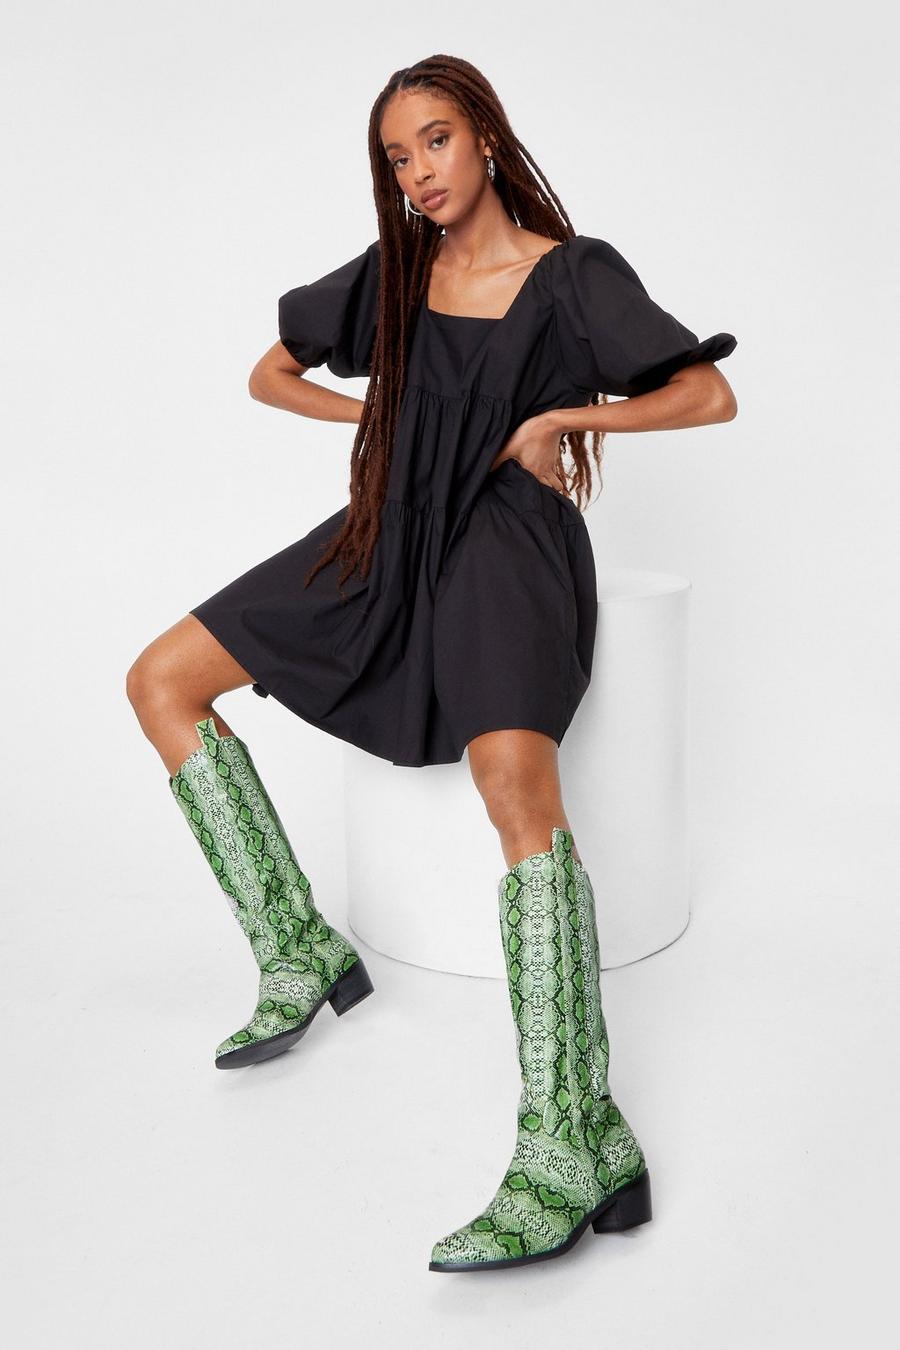 Citrus green Faux Leather Snake Print Cowboy Boots